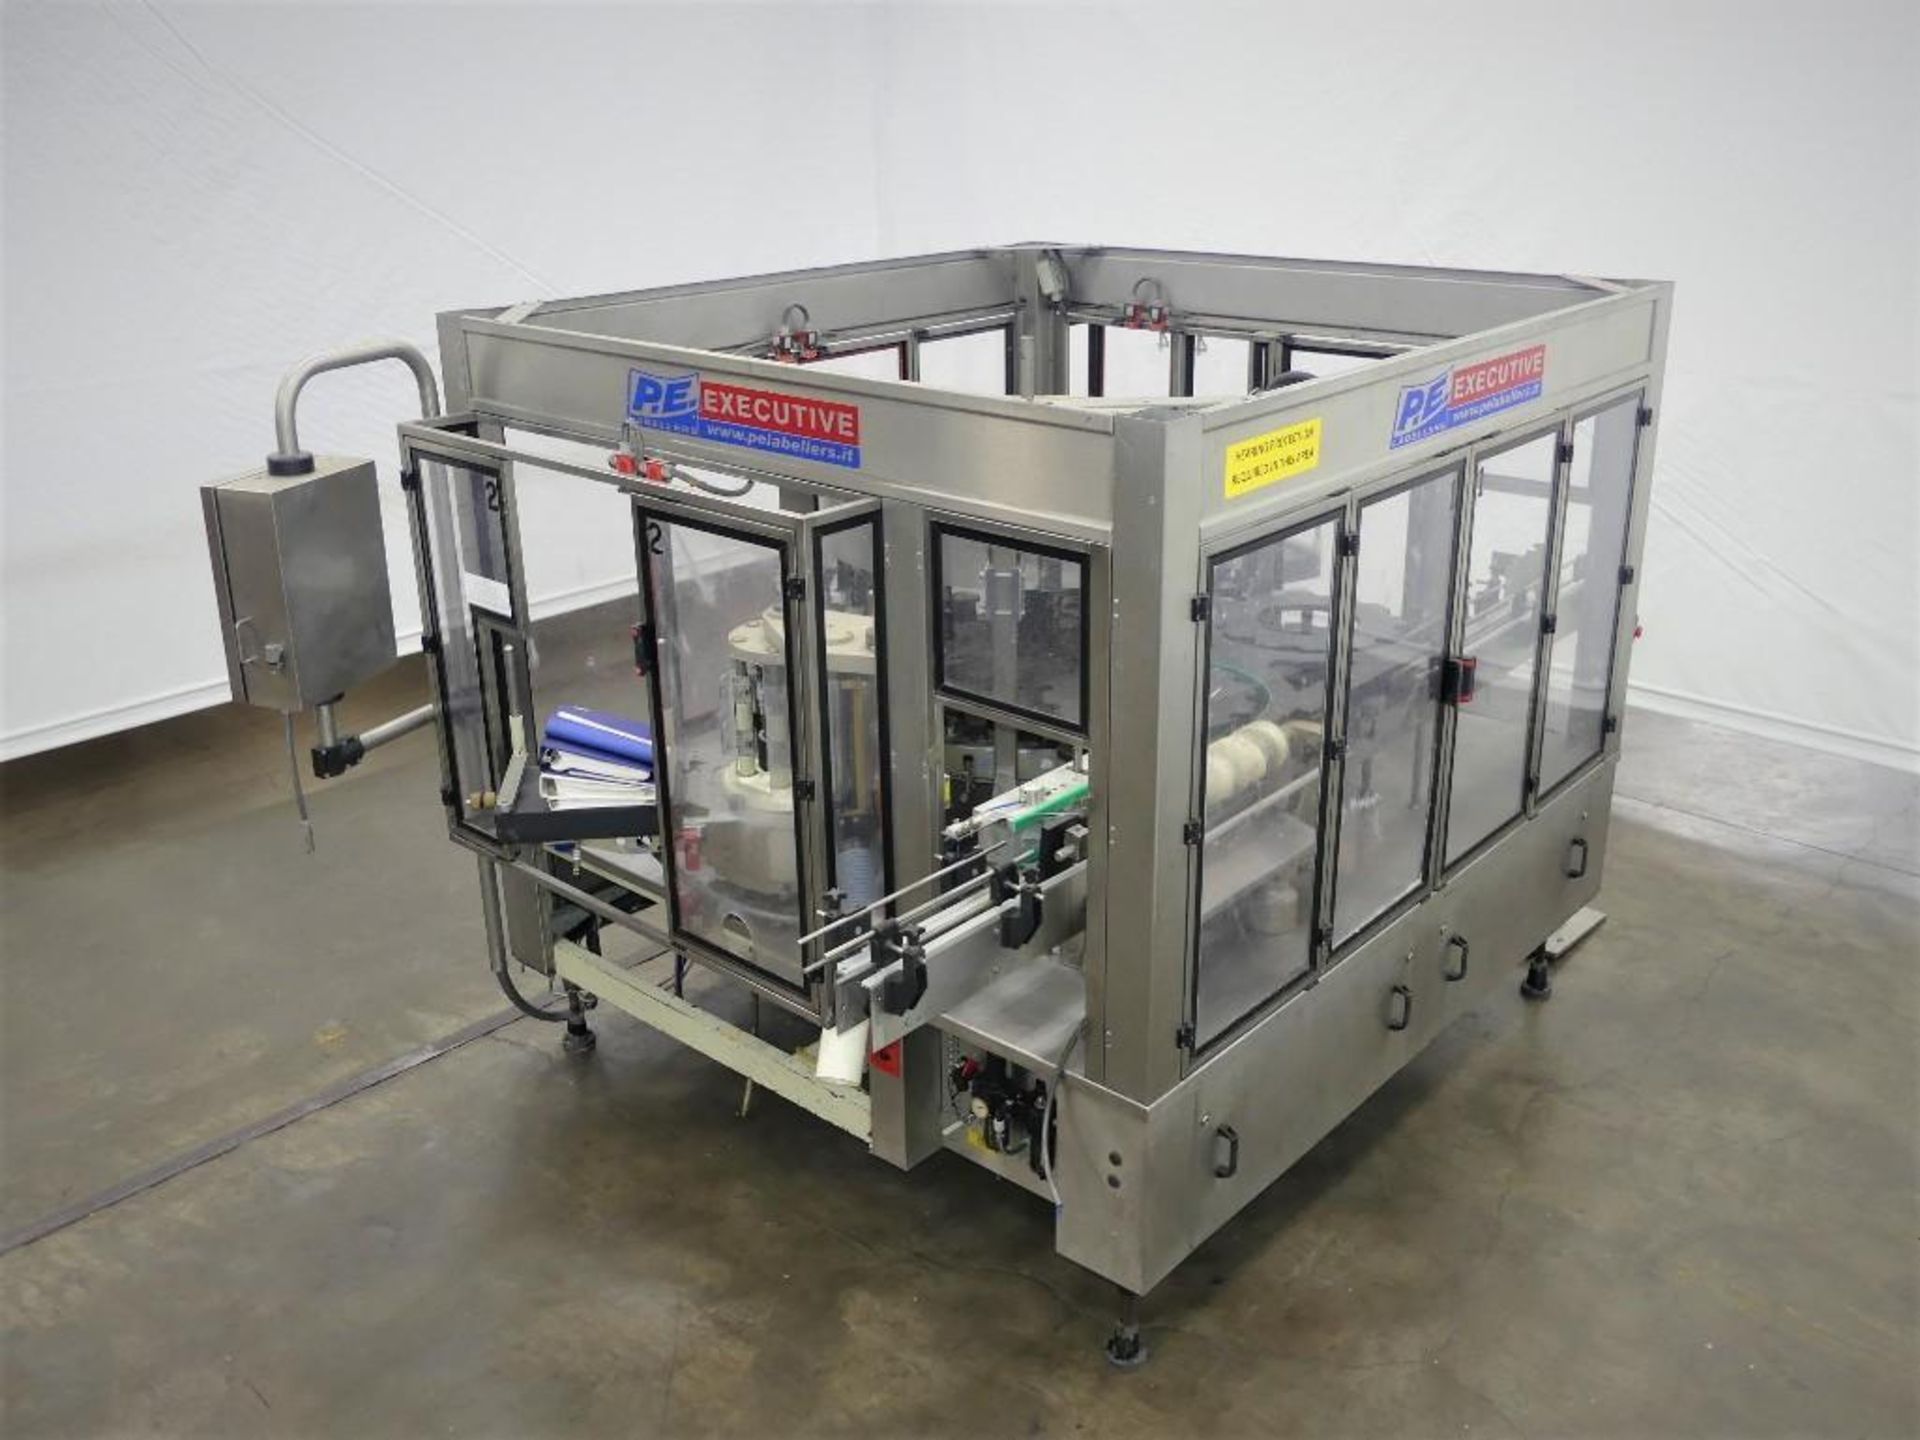 PE Labellers Executive KC 570 Automatic Labelling Machine - Image 4 of 26